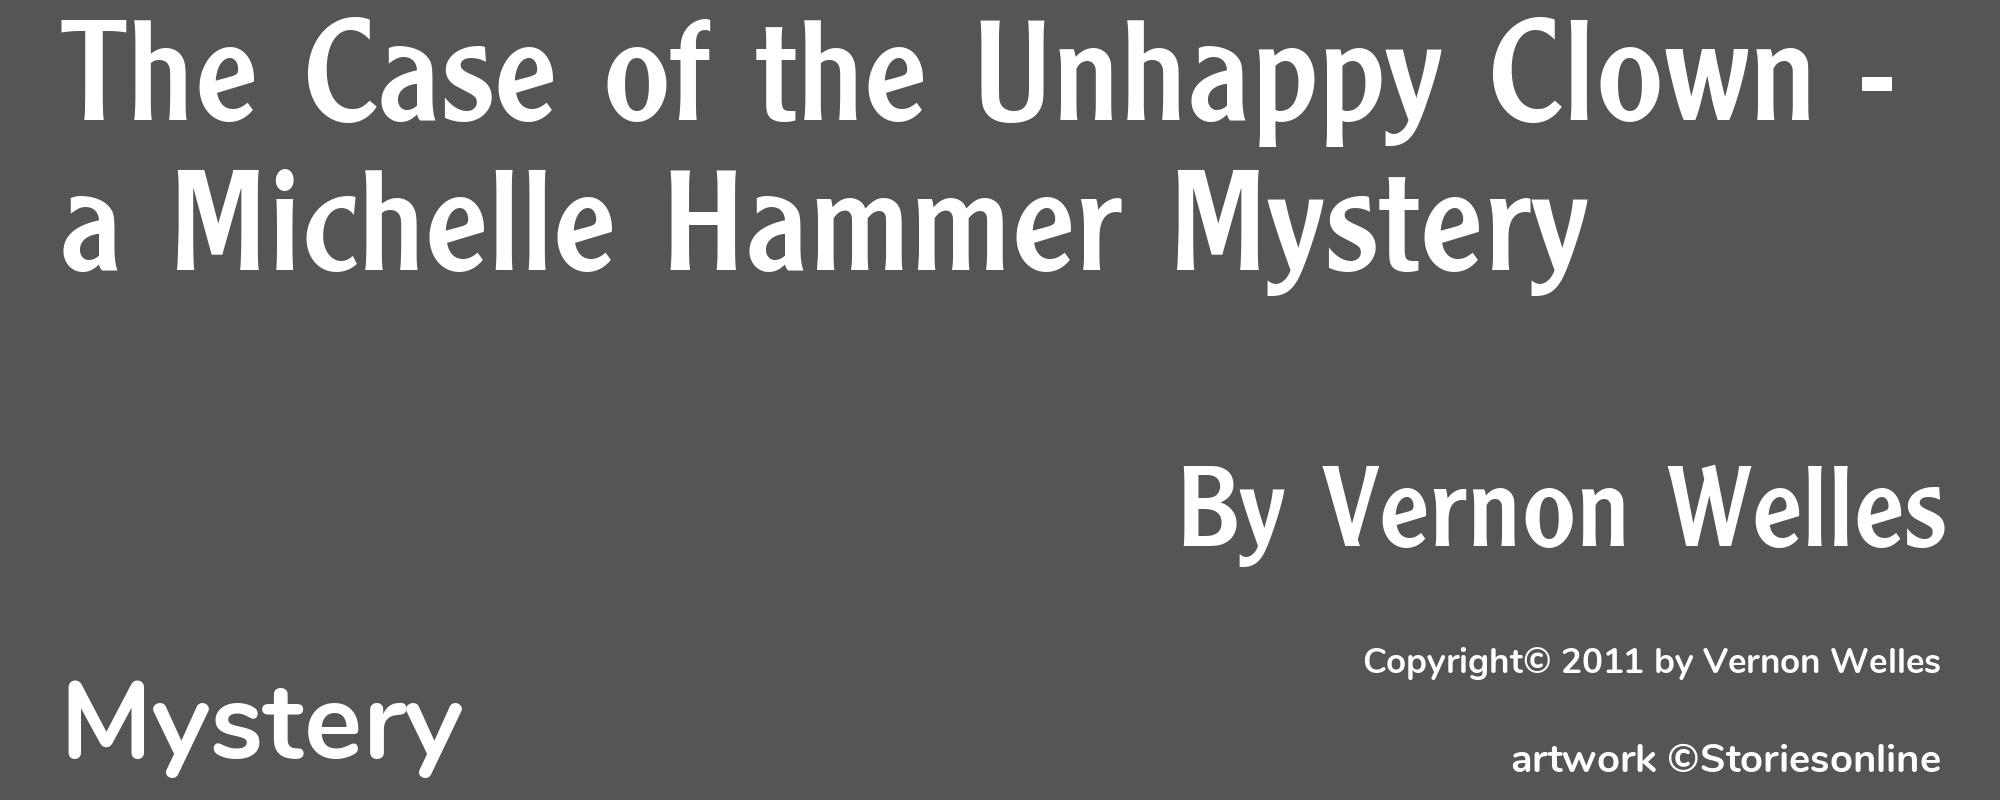 The Case of the Unhappy Clown - a Michelle Hammer Mystery - Cover